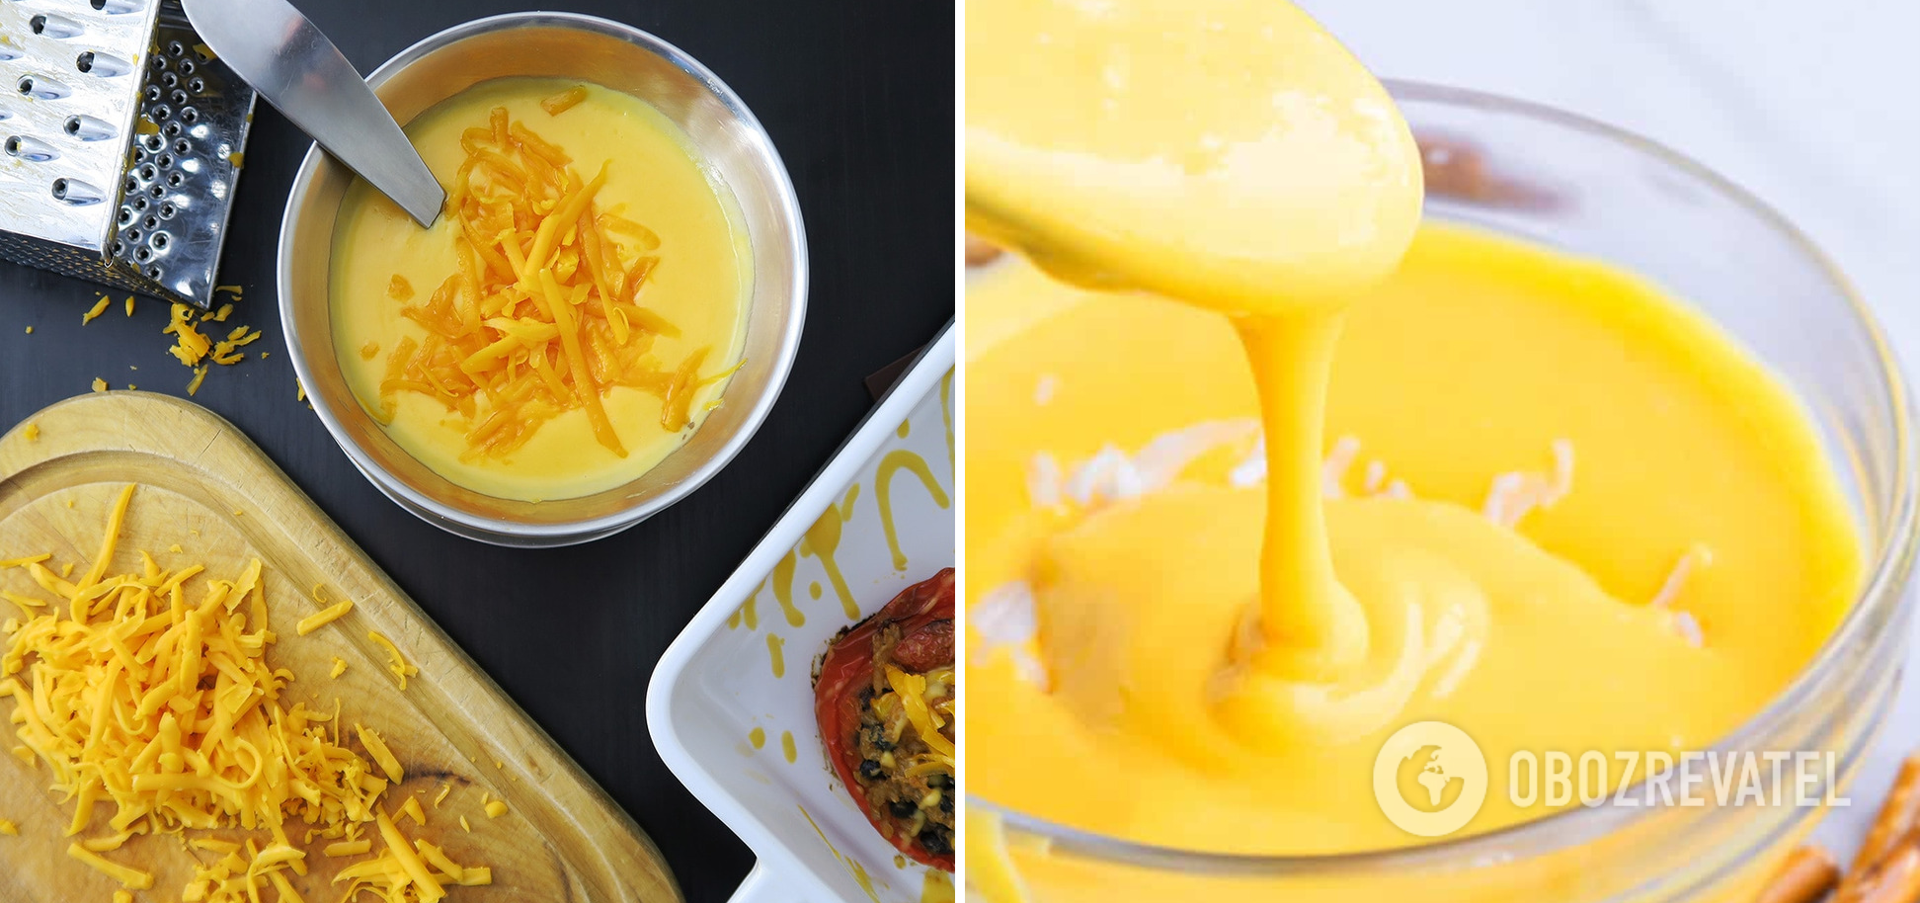 How to make cheese sauce properly